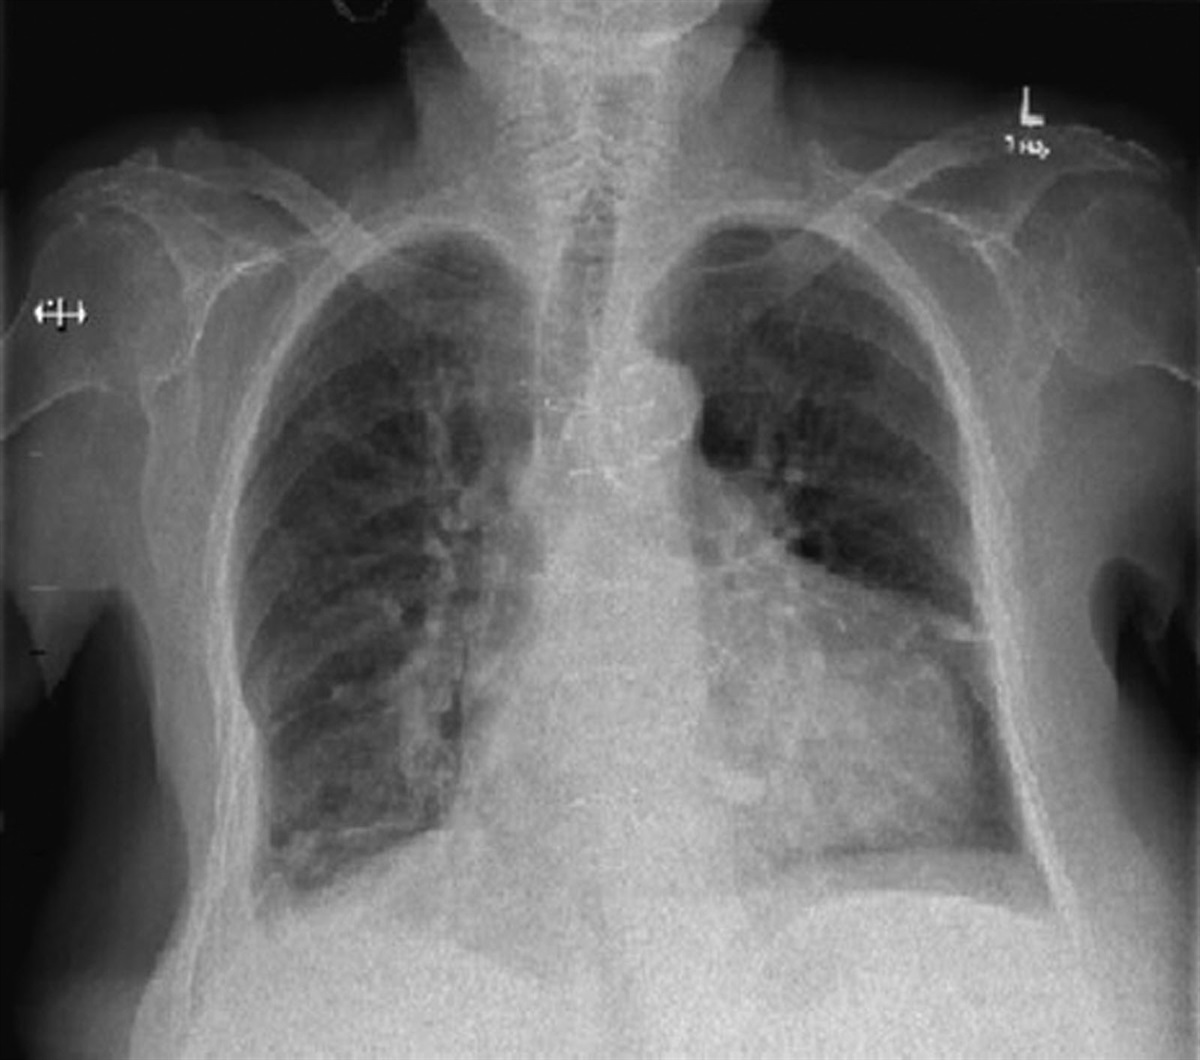 Ventilation-perfusion scan for diagnosing pulmonary embolism: do chest x-rays matter?